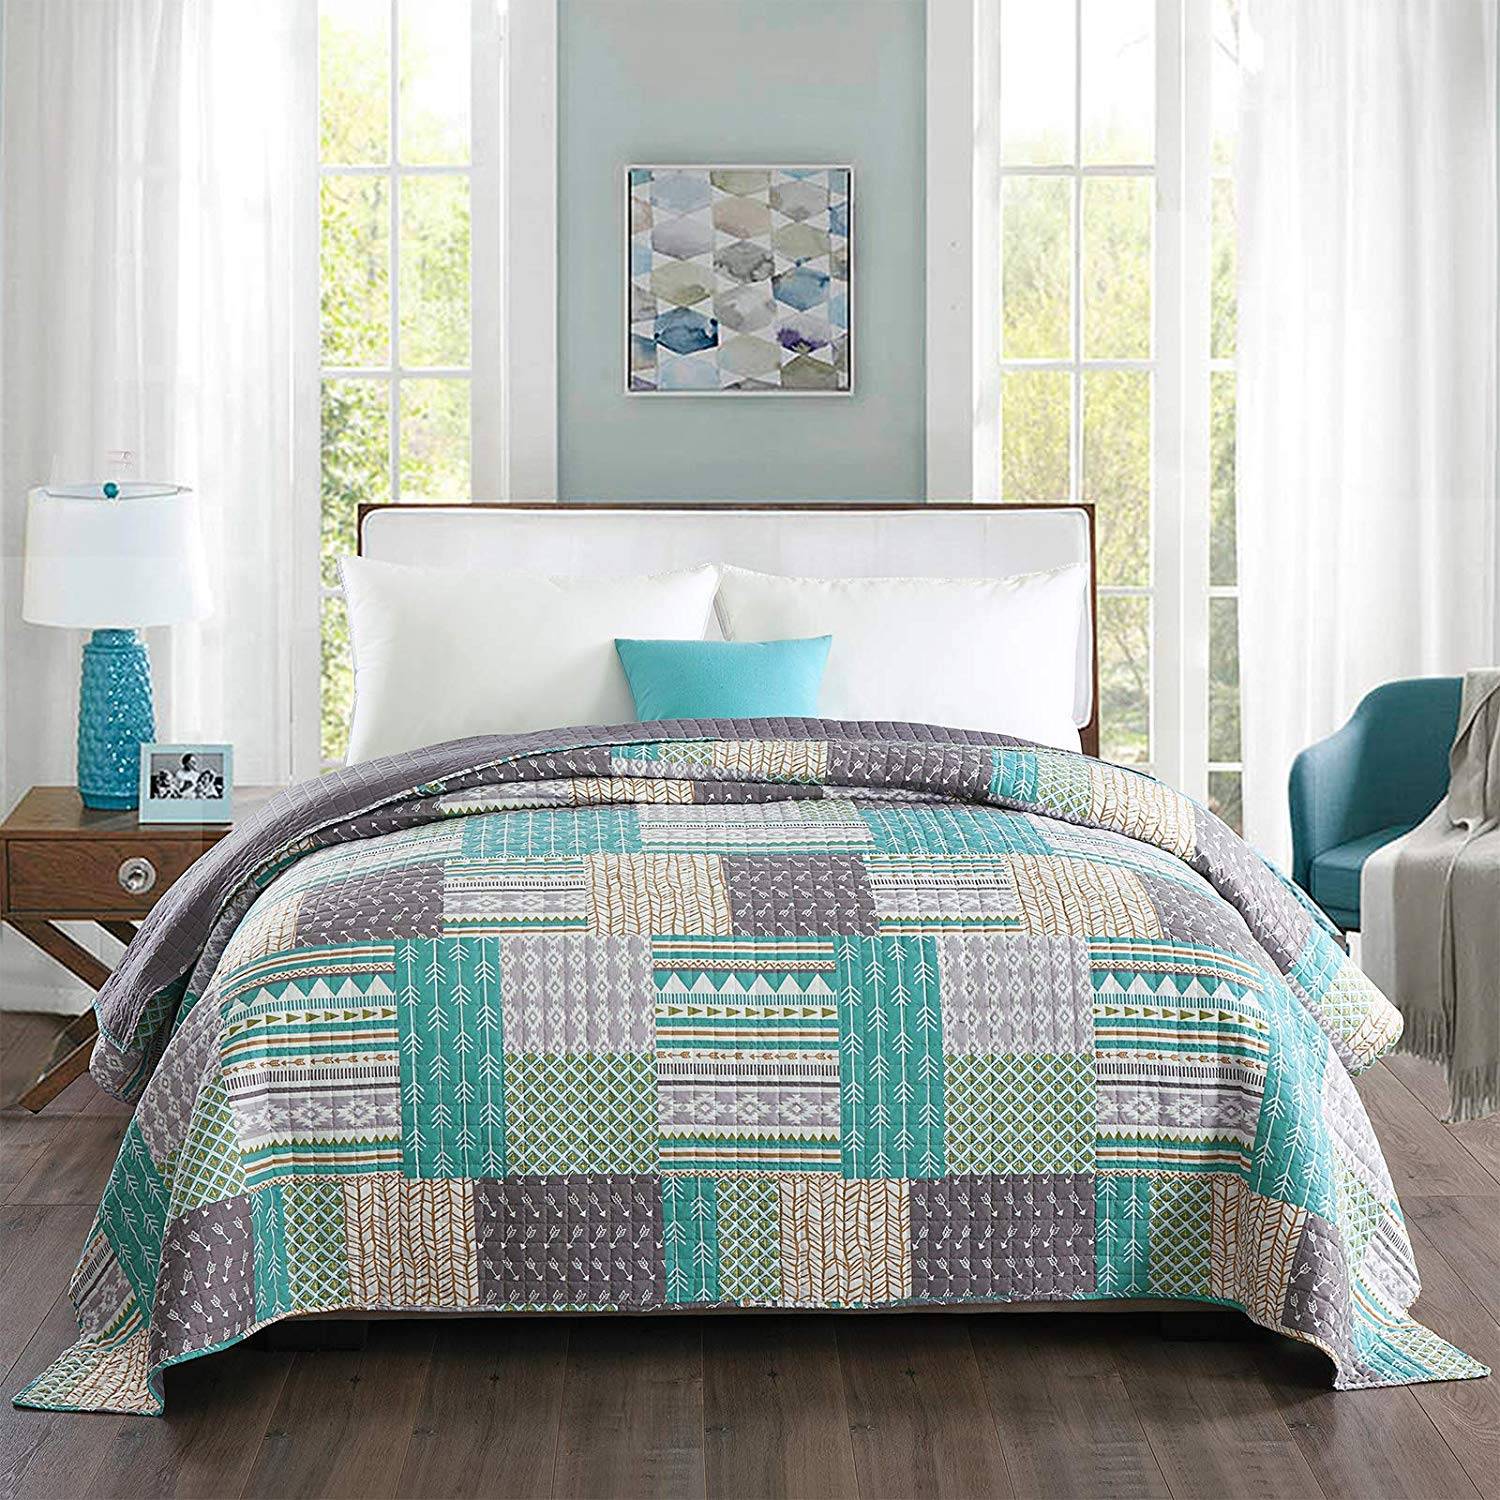 Bedspread Quilted Patchwork Bed Throw Blanket Lightweight